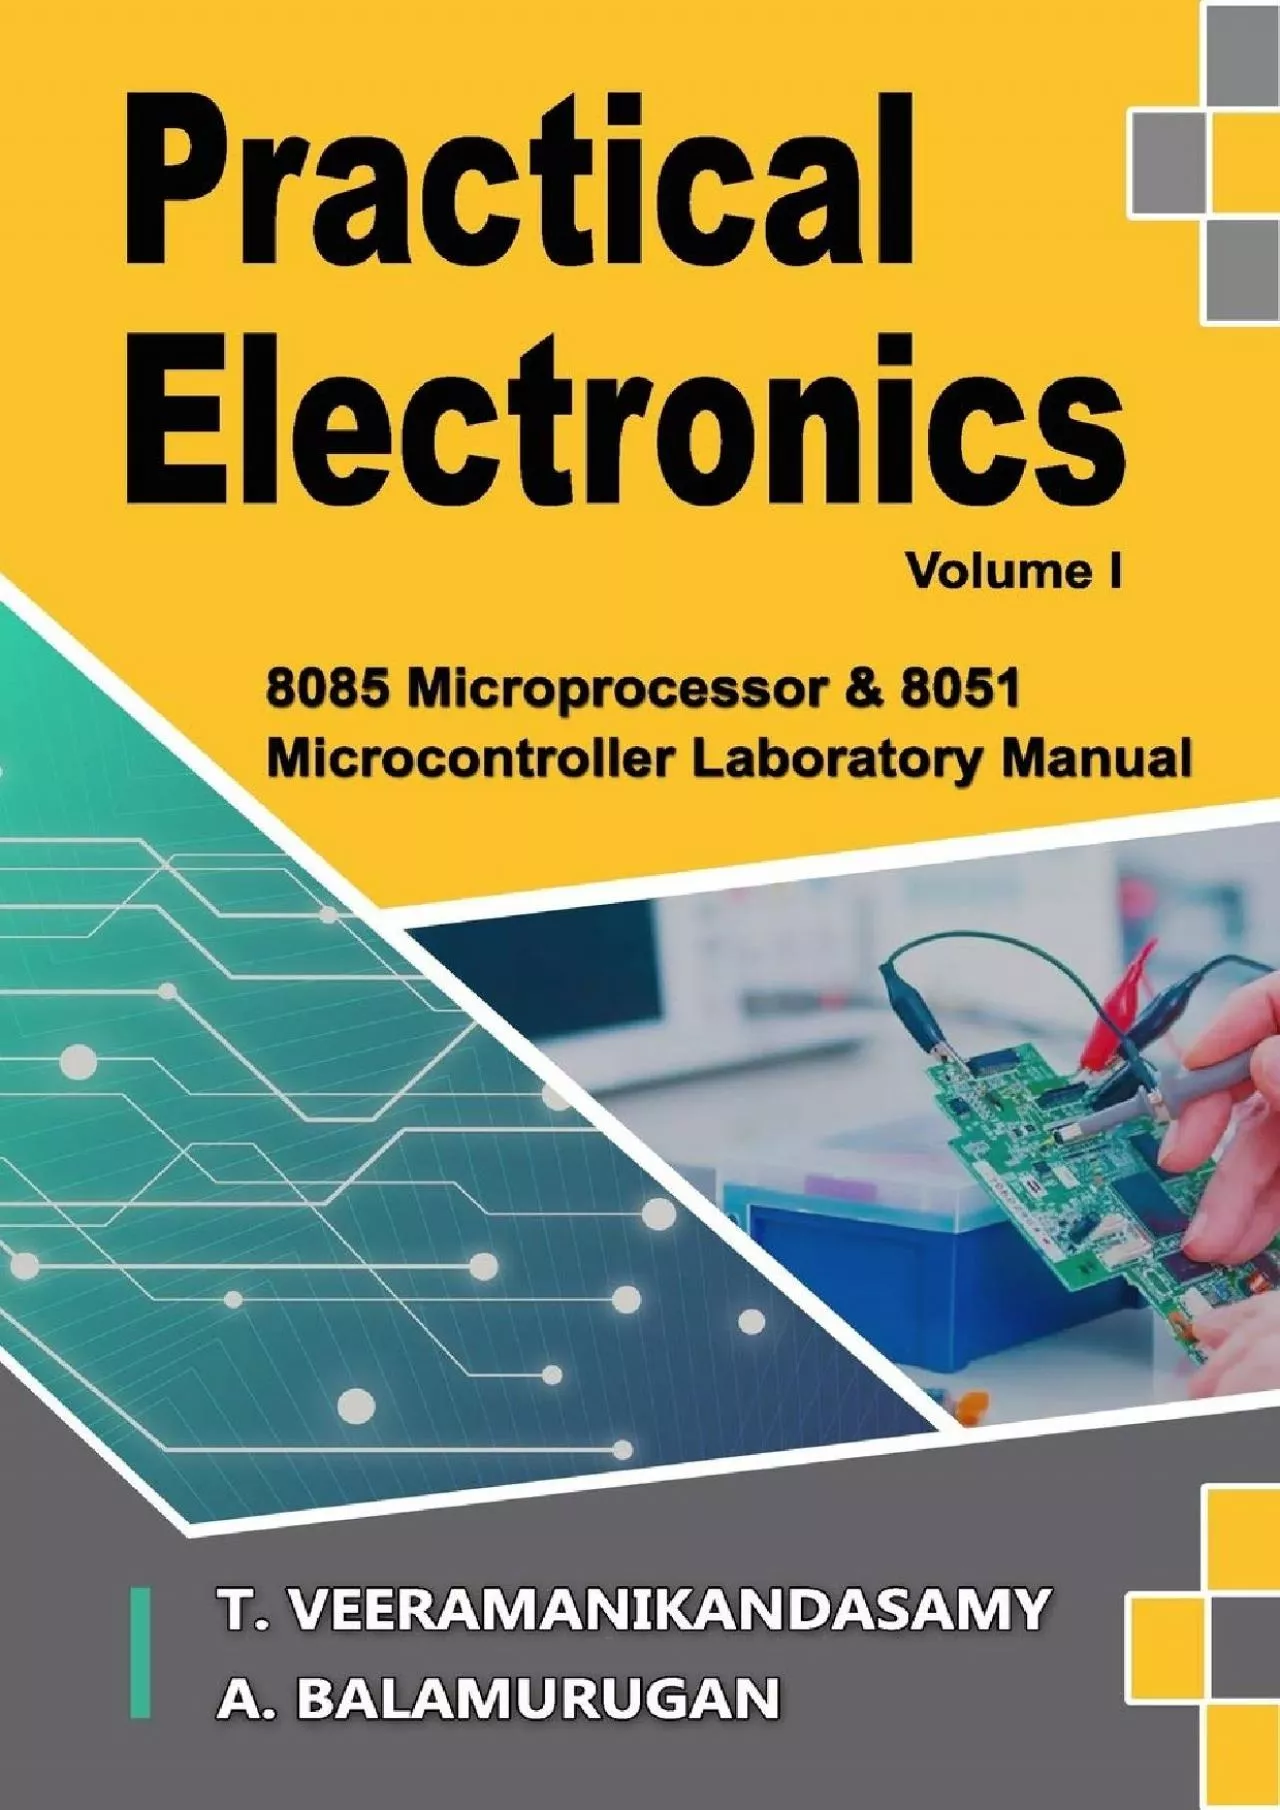 [READING BOOK]-Practical Electronics (Volume I): 8085 Microprocessor & 8051 Microcontroller